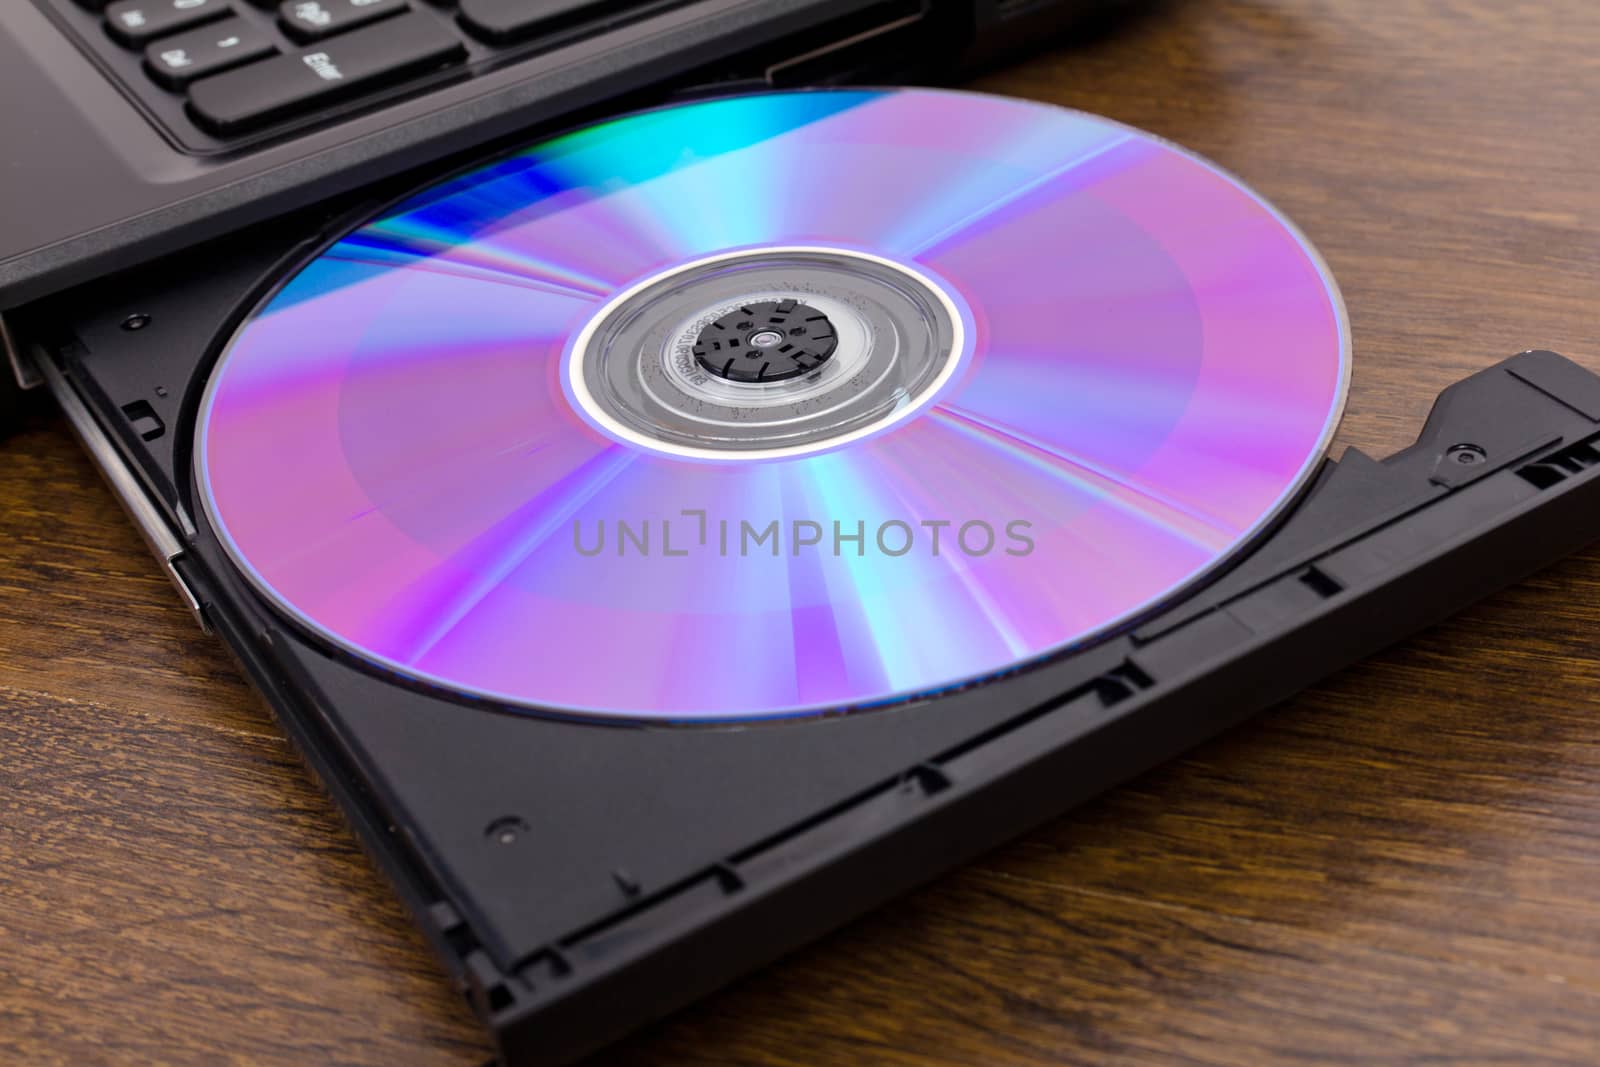 the new DVD disk cutting-in in a notebook